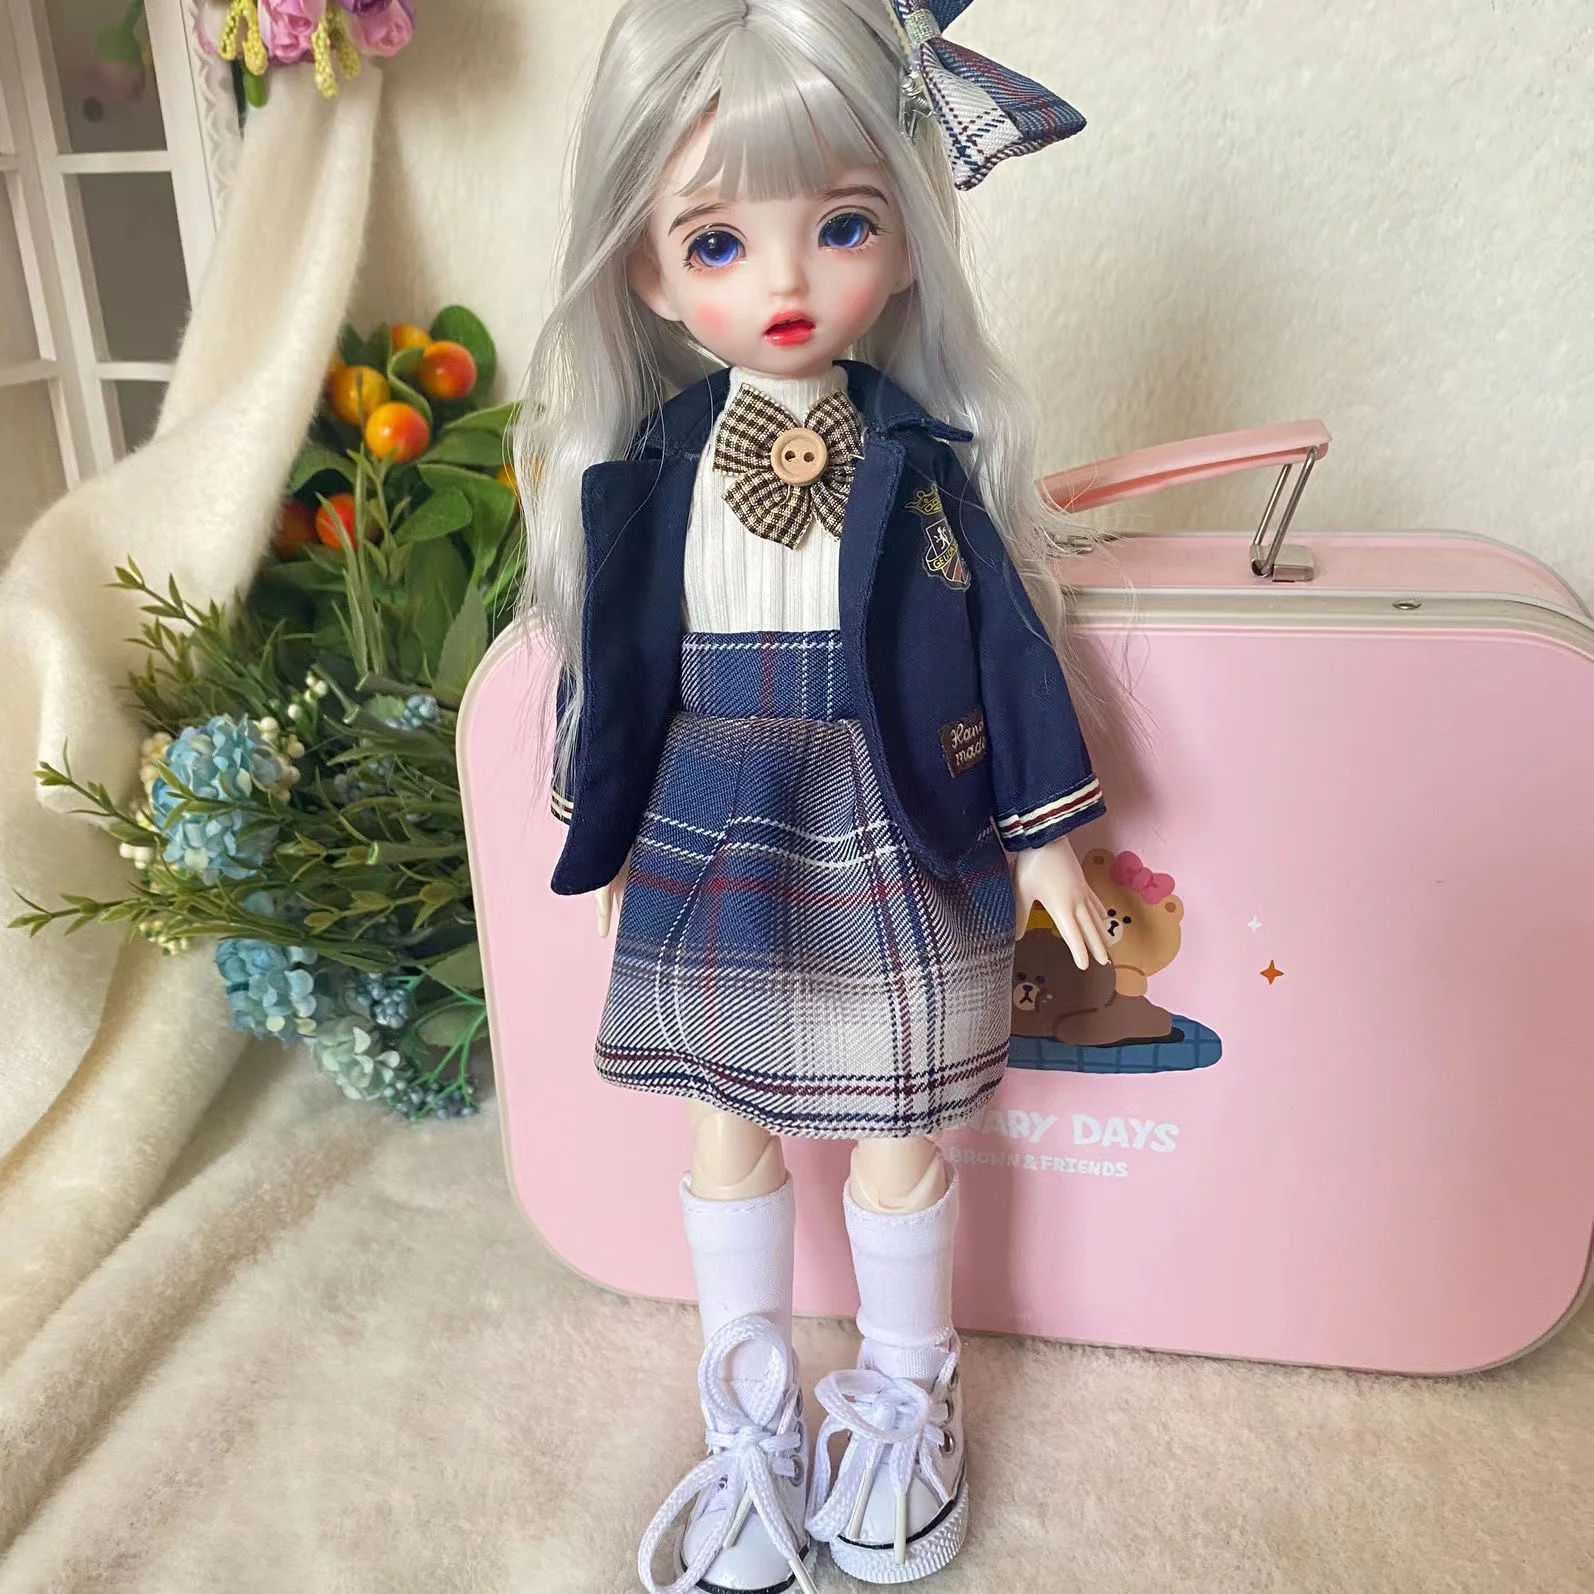 Customized Seconds issue 30CM 1/6 BJD Little Princess Doll 3D Eyes 23 Joints High Temperature Hair 6 Point BJD Dolls, Children's aesthetica issue 115